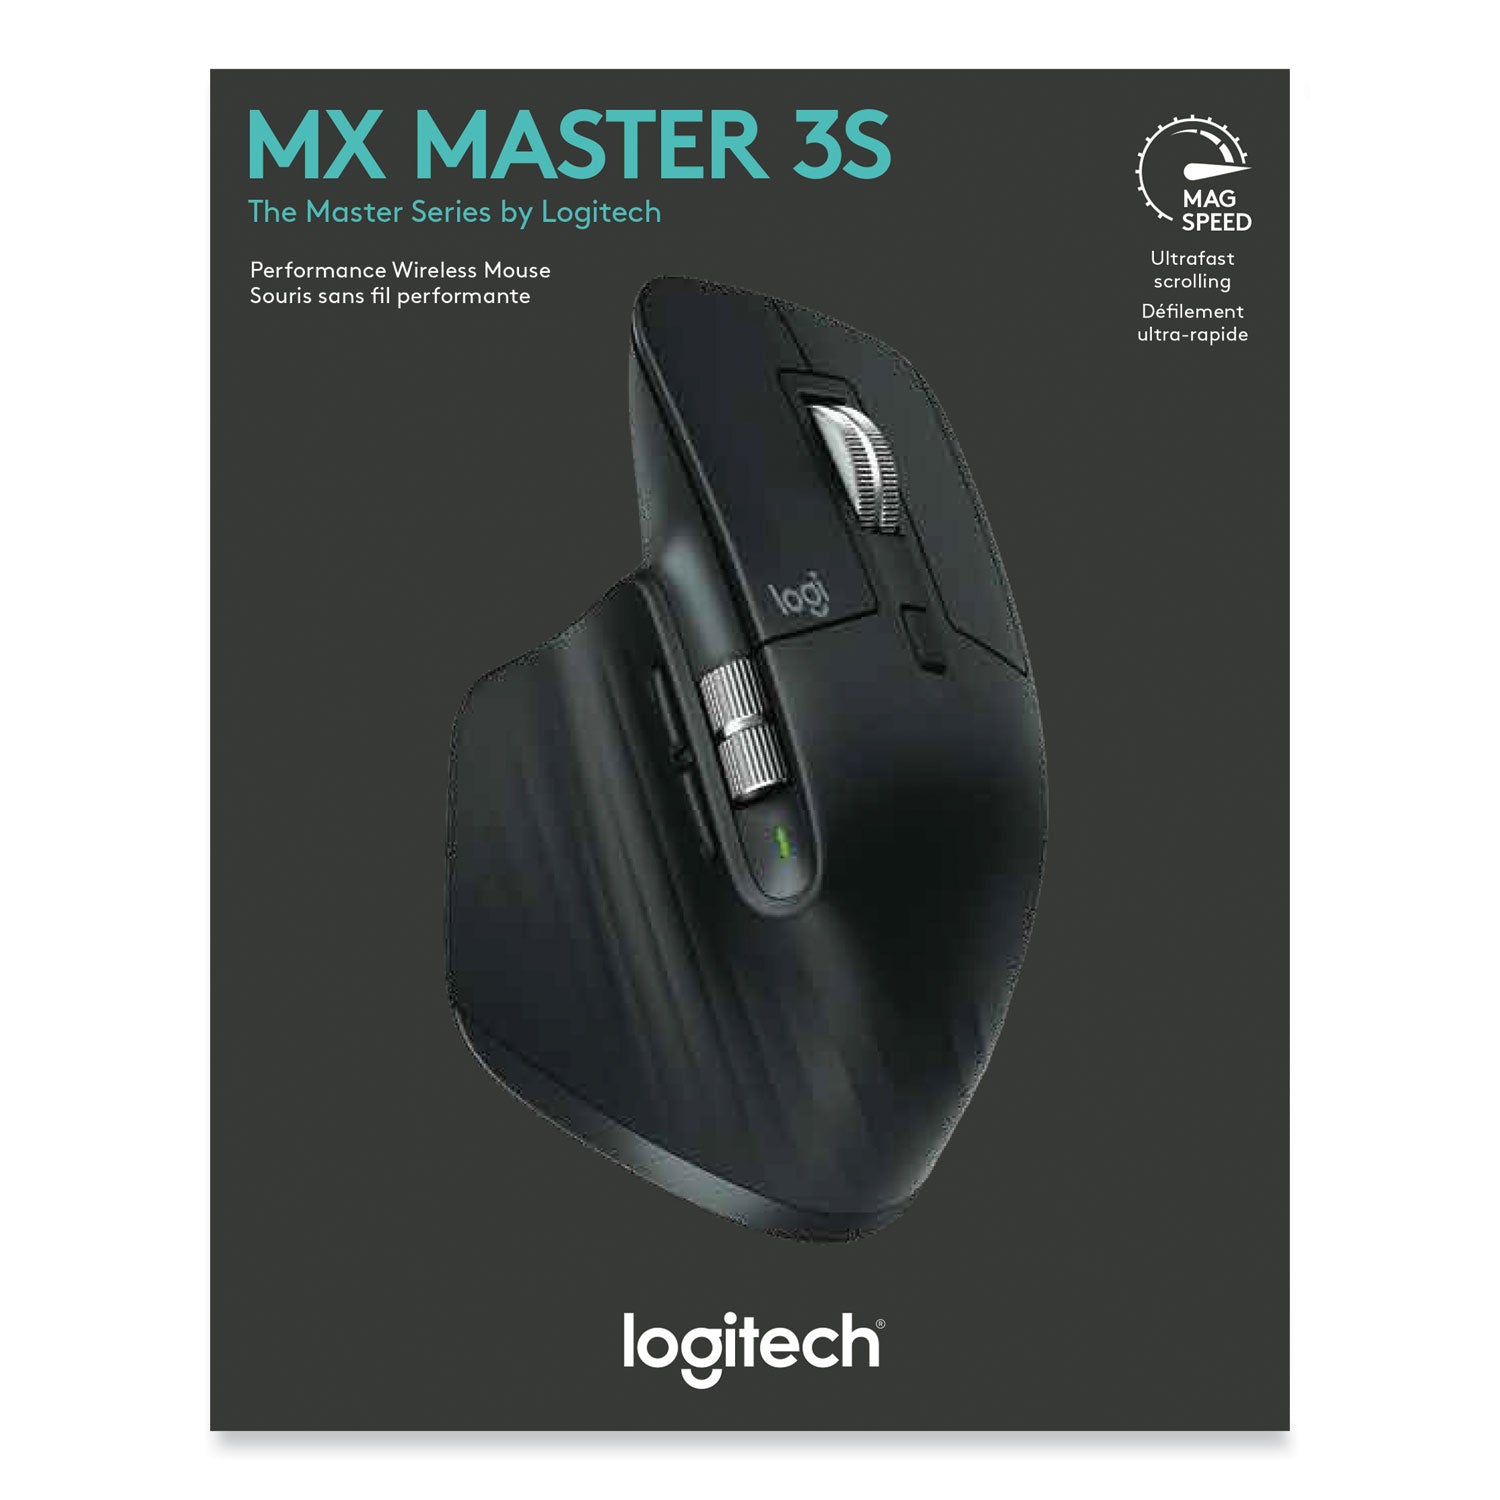 mx-master-3s-performance-wireless-mouse-24-ghz-frequency-32-ft-wireless-range-right-hand-use-black_log910006556 - 2